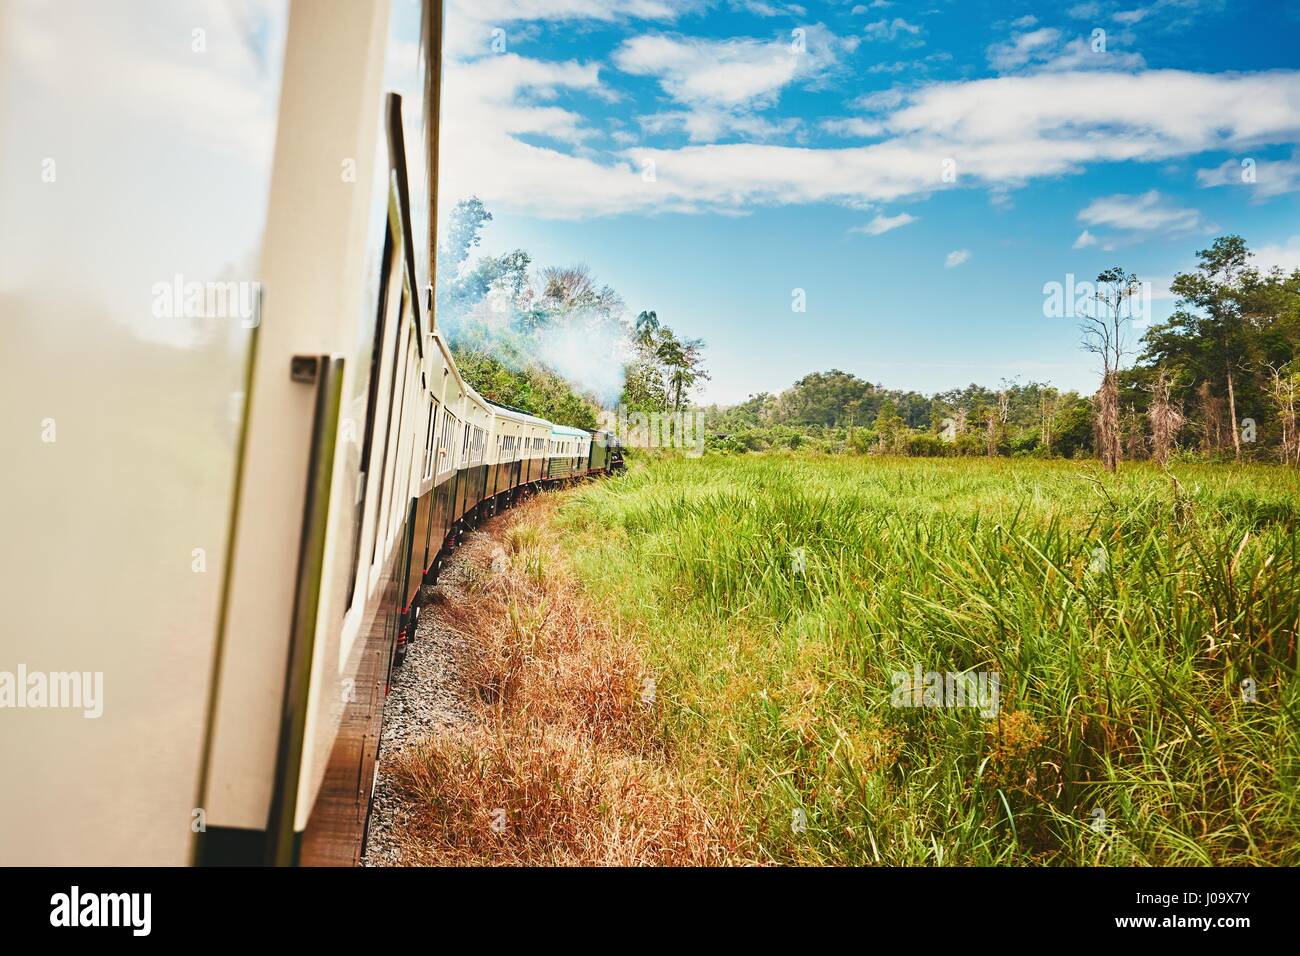 View from window of the steam train passing through countryside in Malaysia. Stock Photo